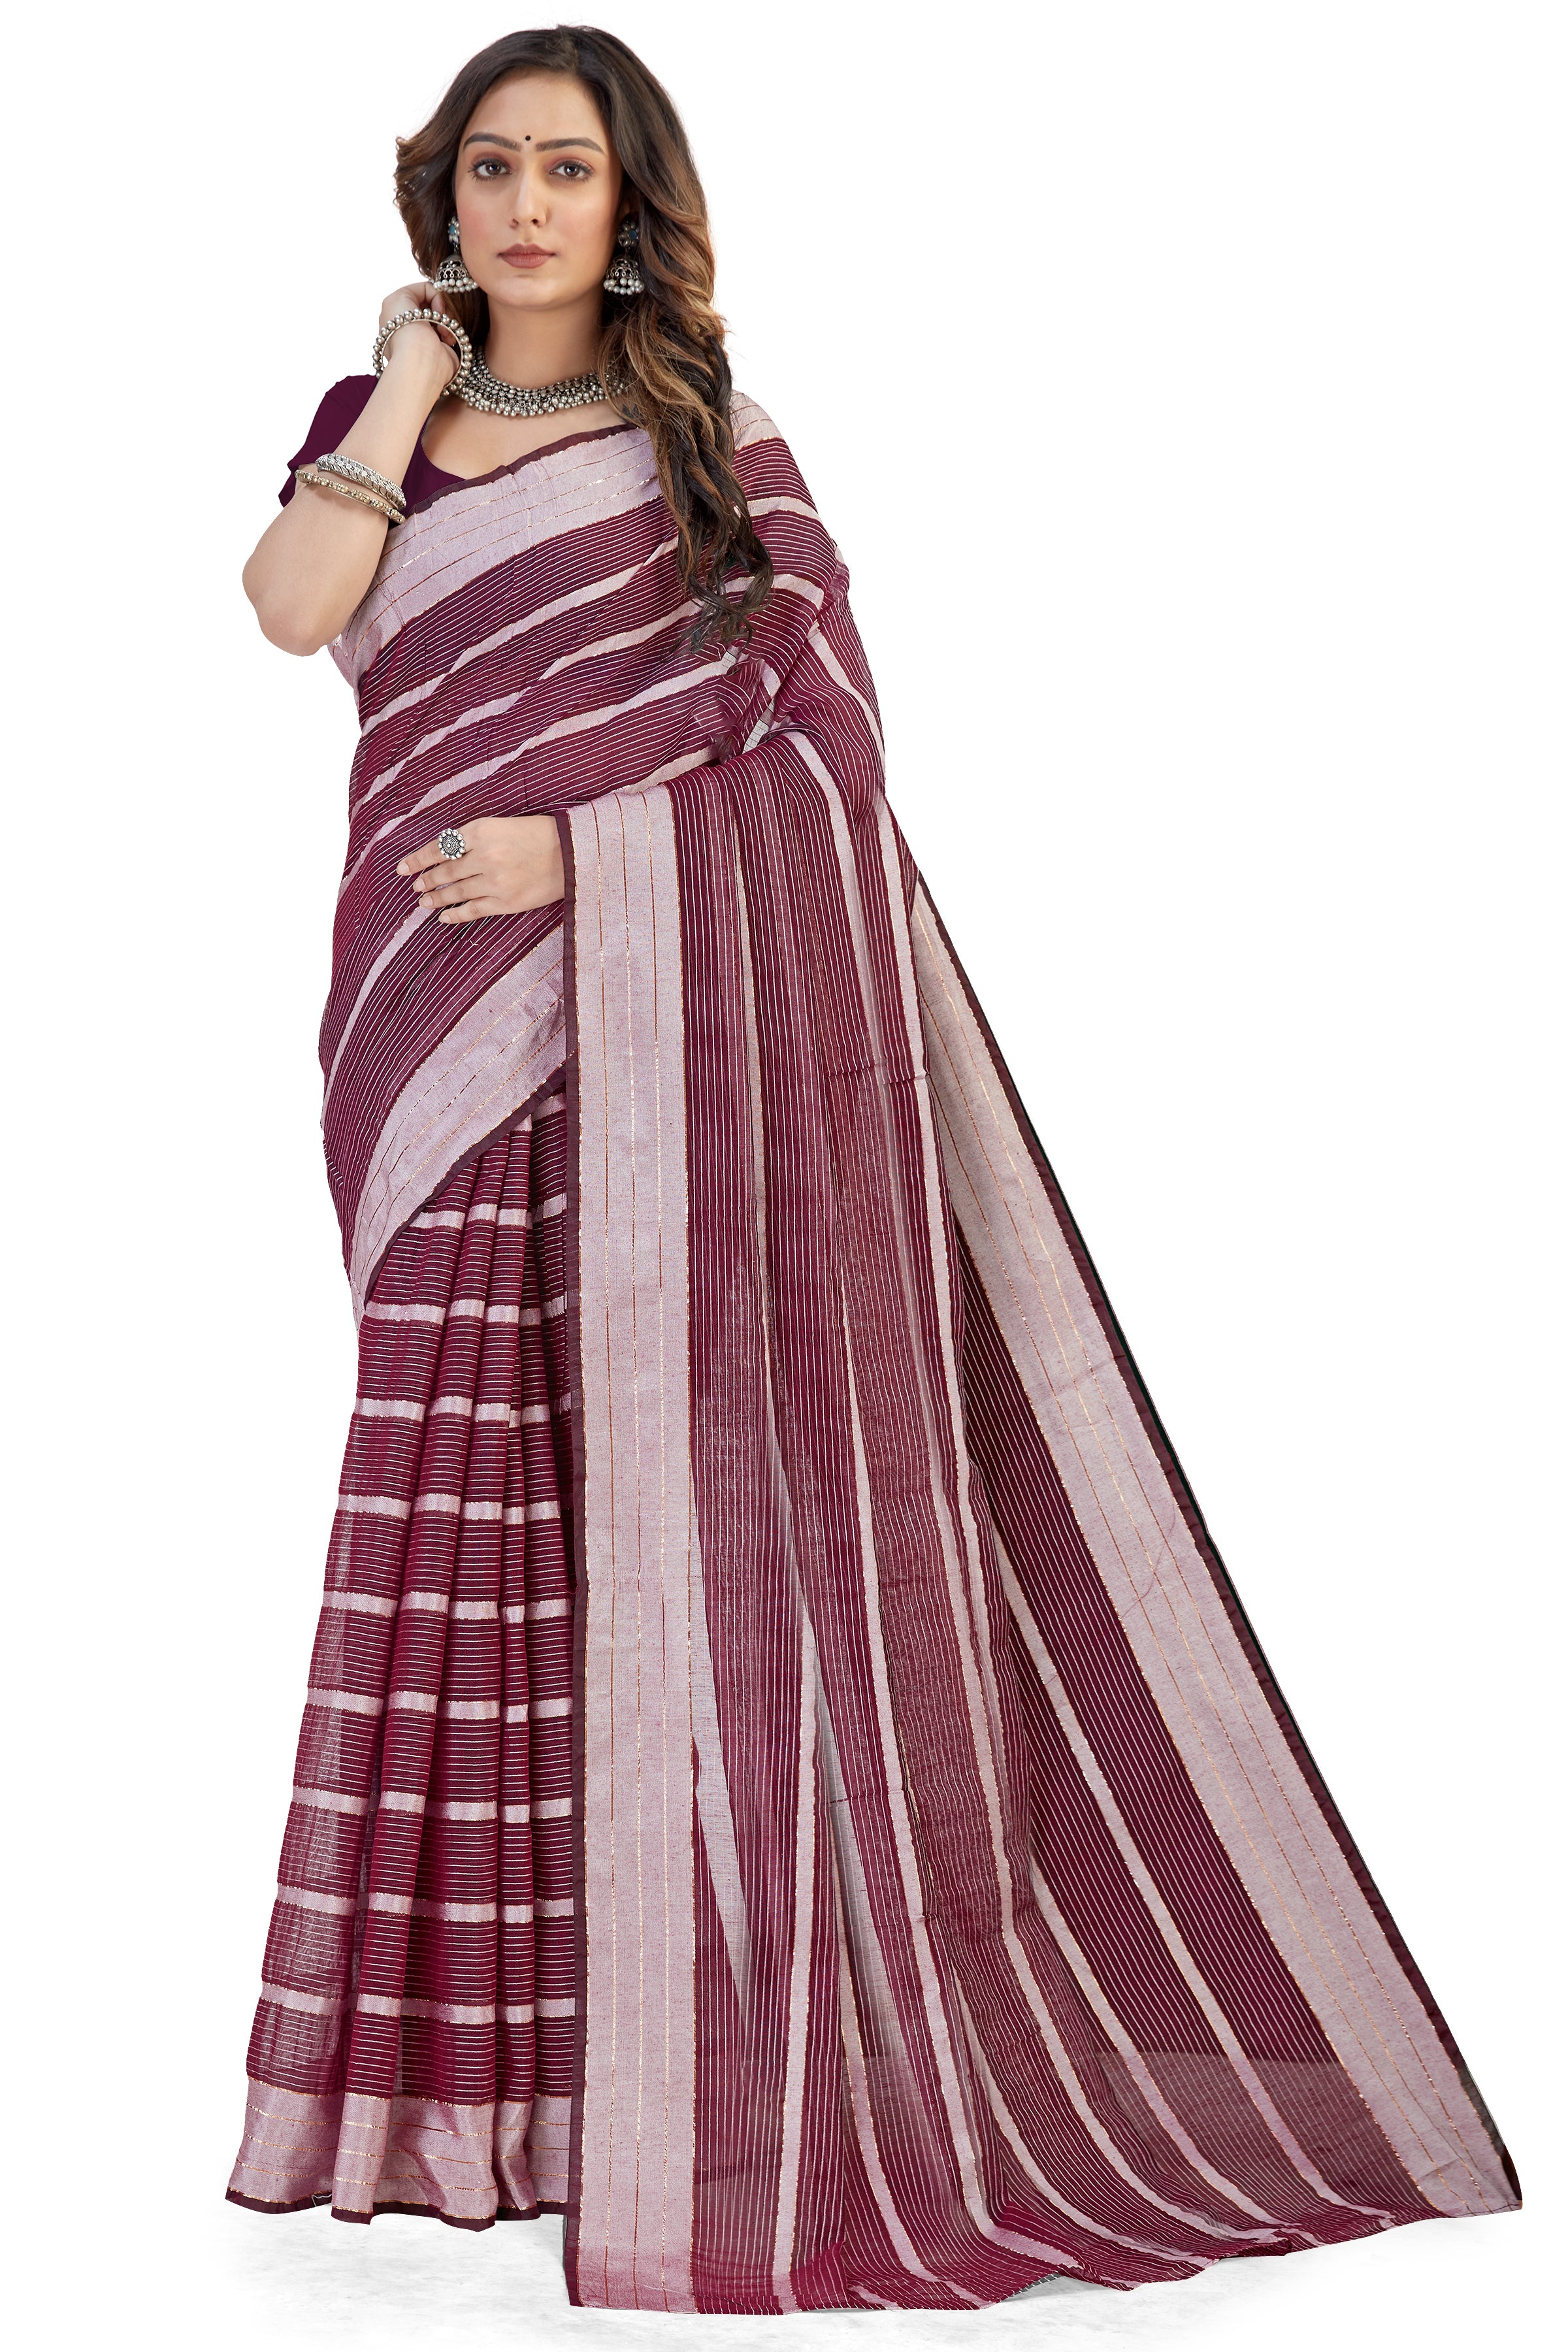 Women's Solid Self woven Striped Daily Wear Formal Cotton Bleand Saree With Blouse Piece (Purple) - NIMIDHYA